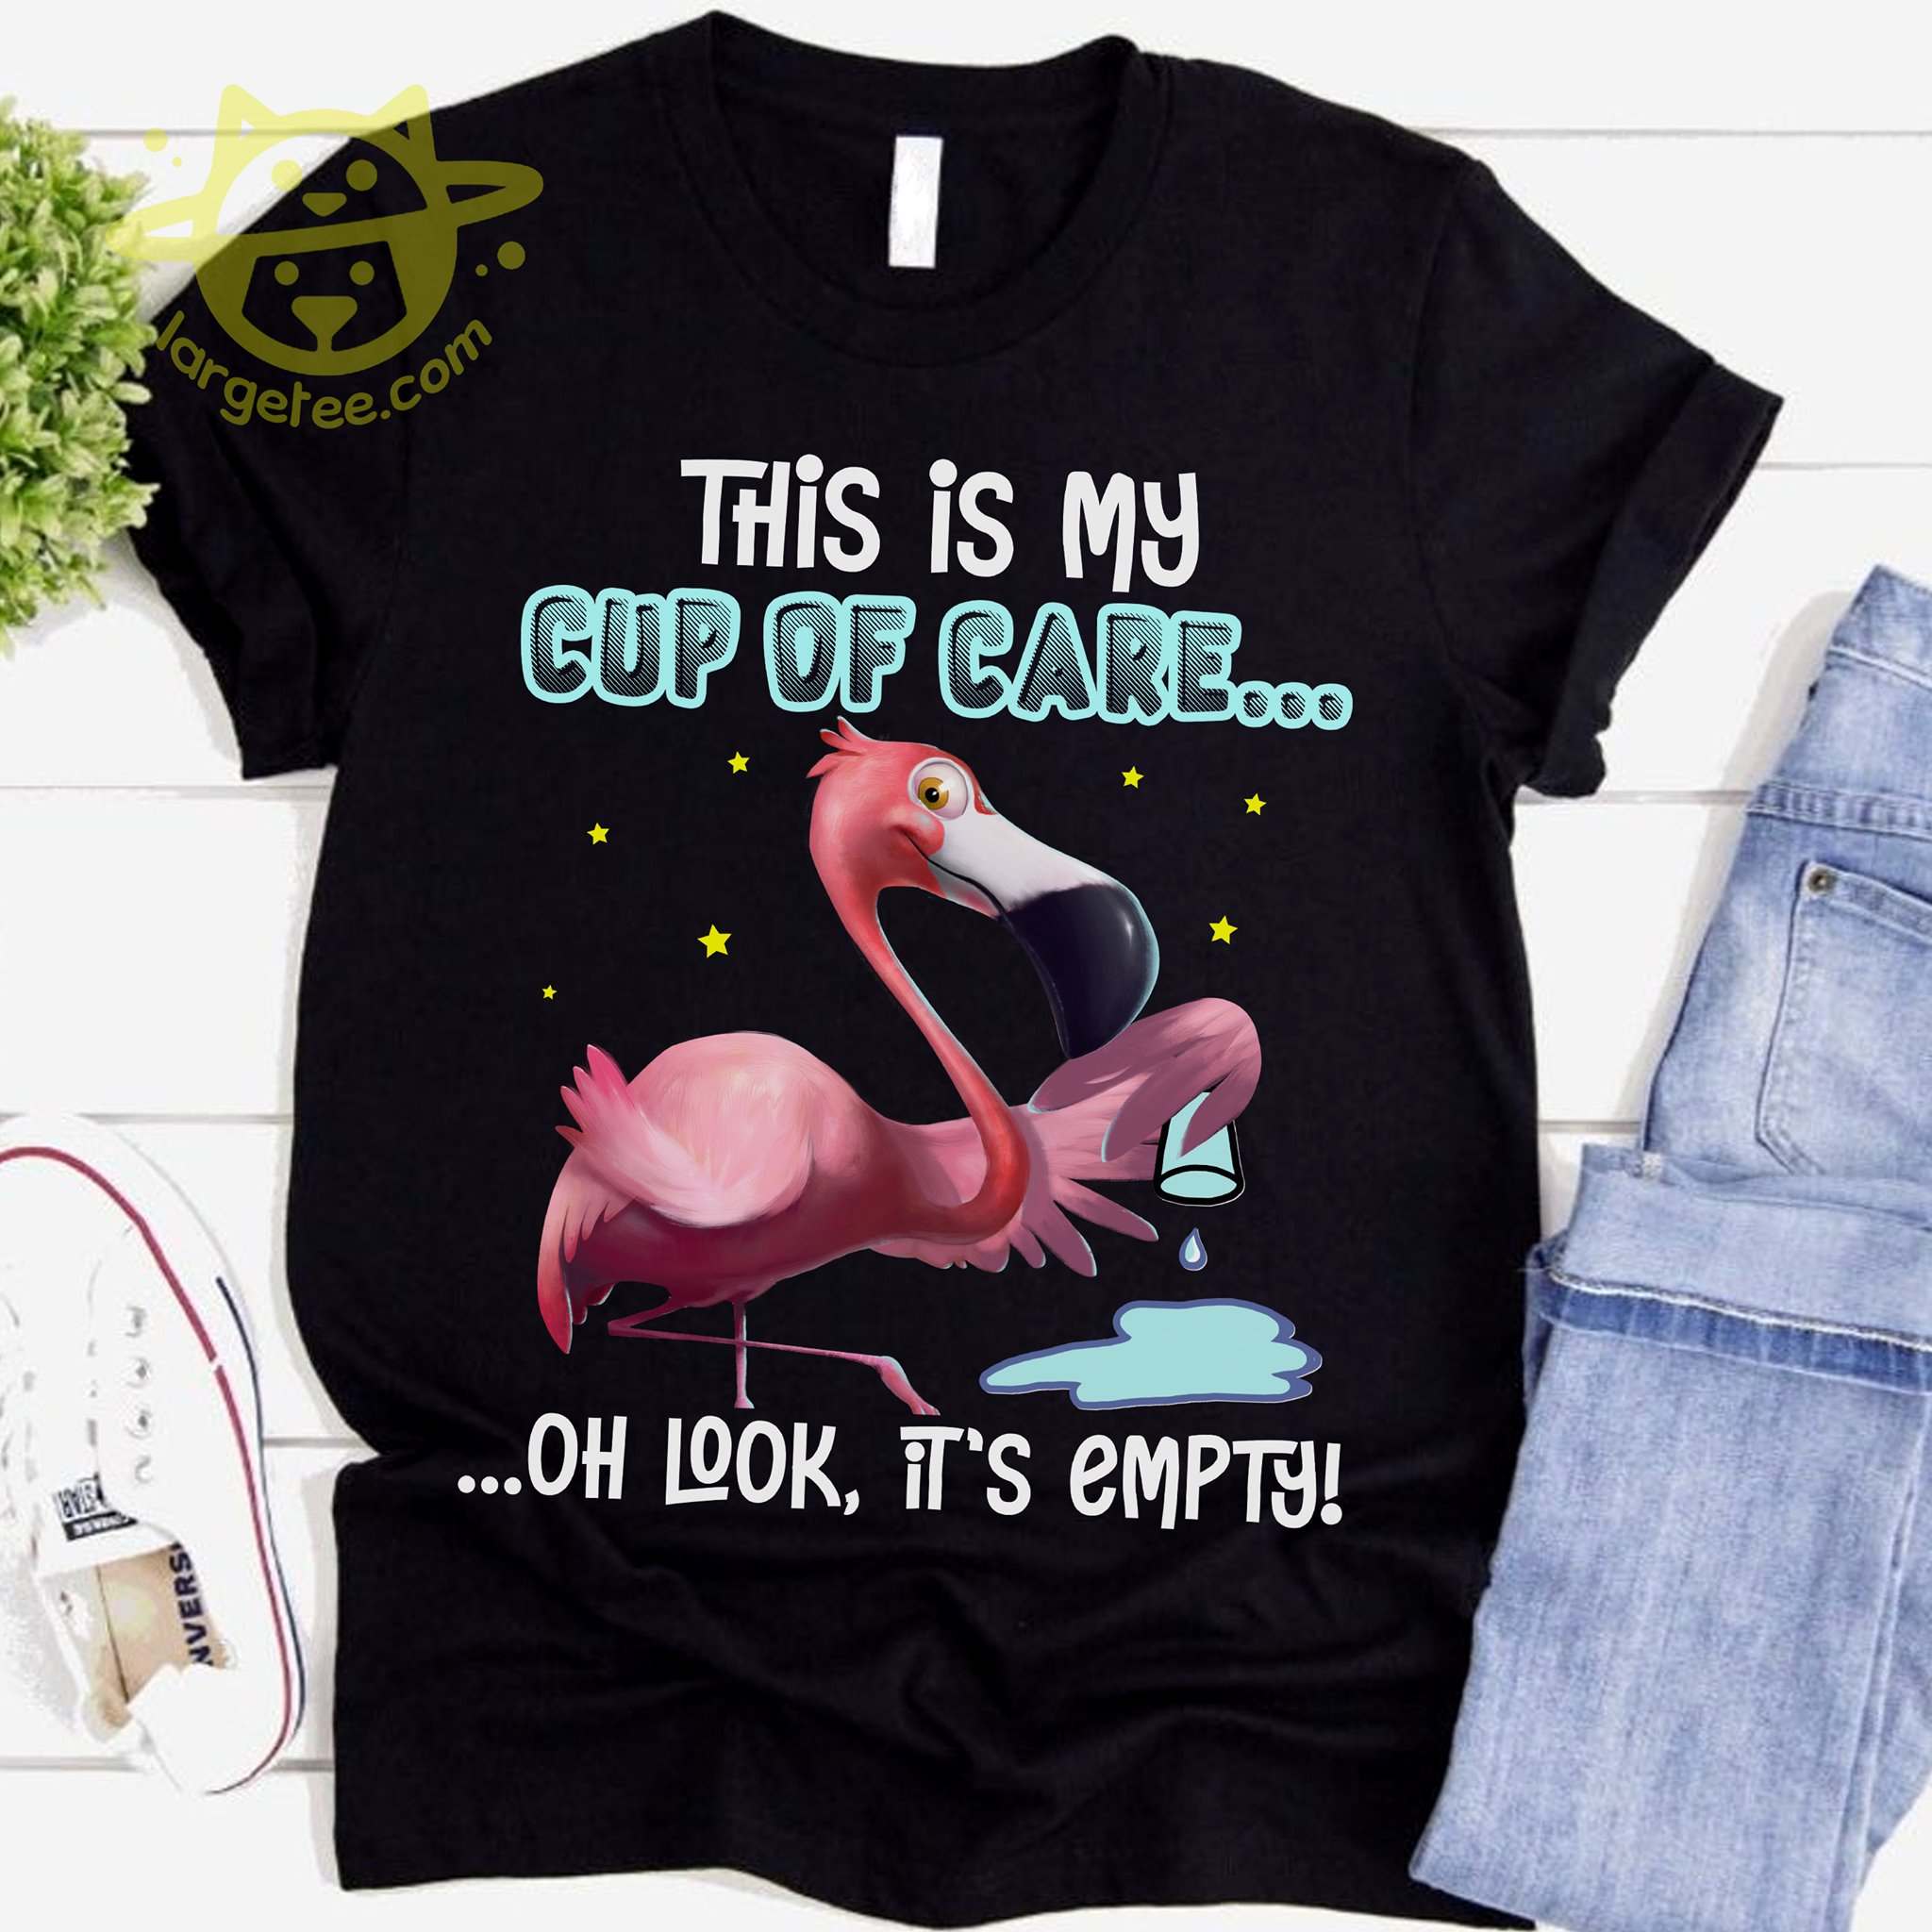 This is my cup of care oh look, it's empty - Grumpy flamingo